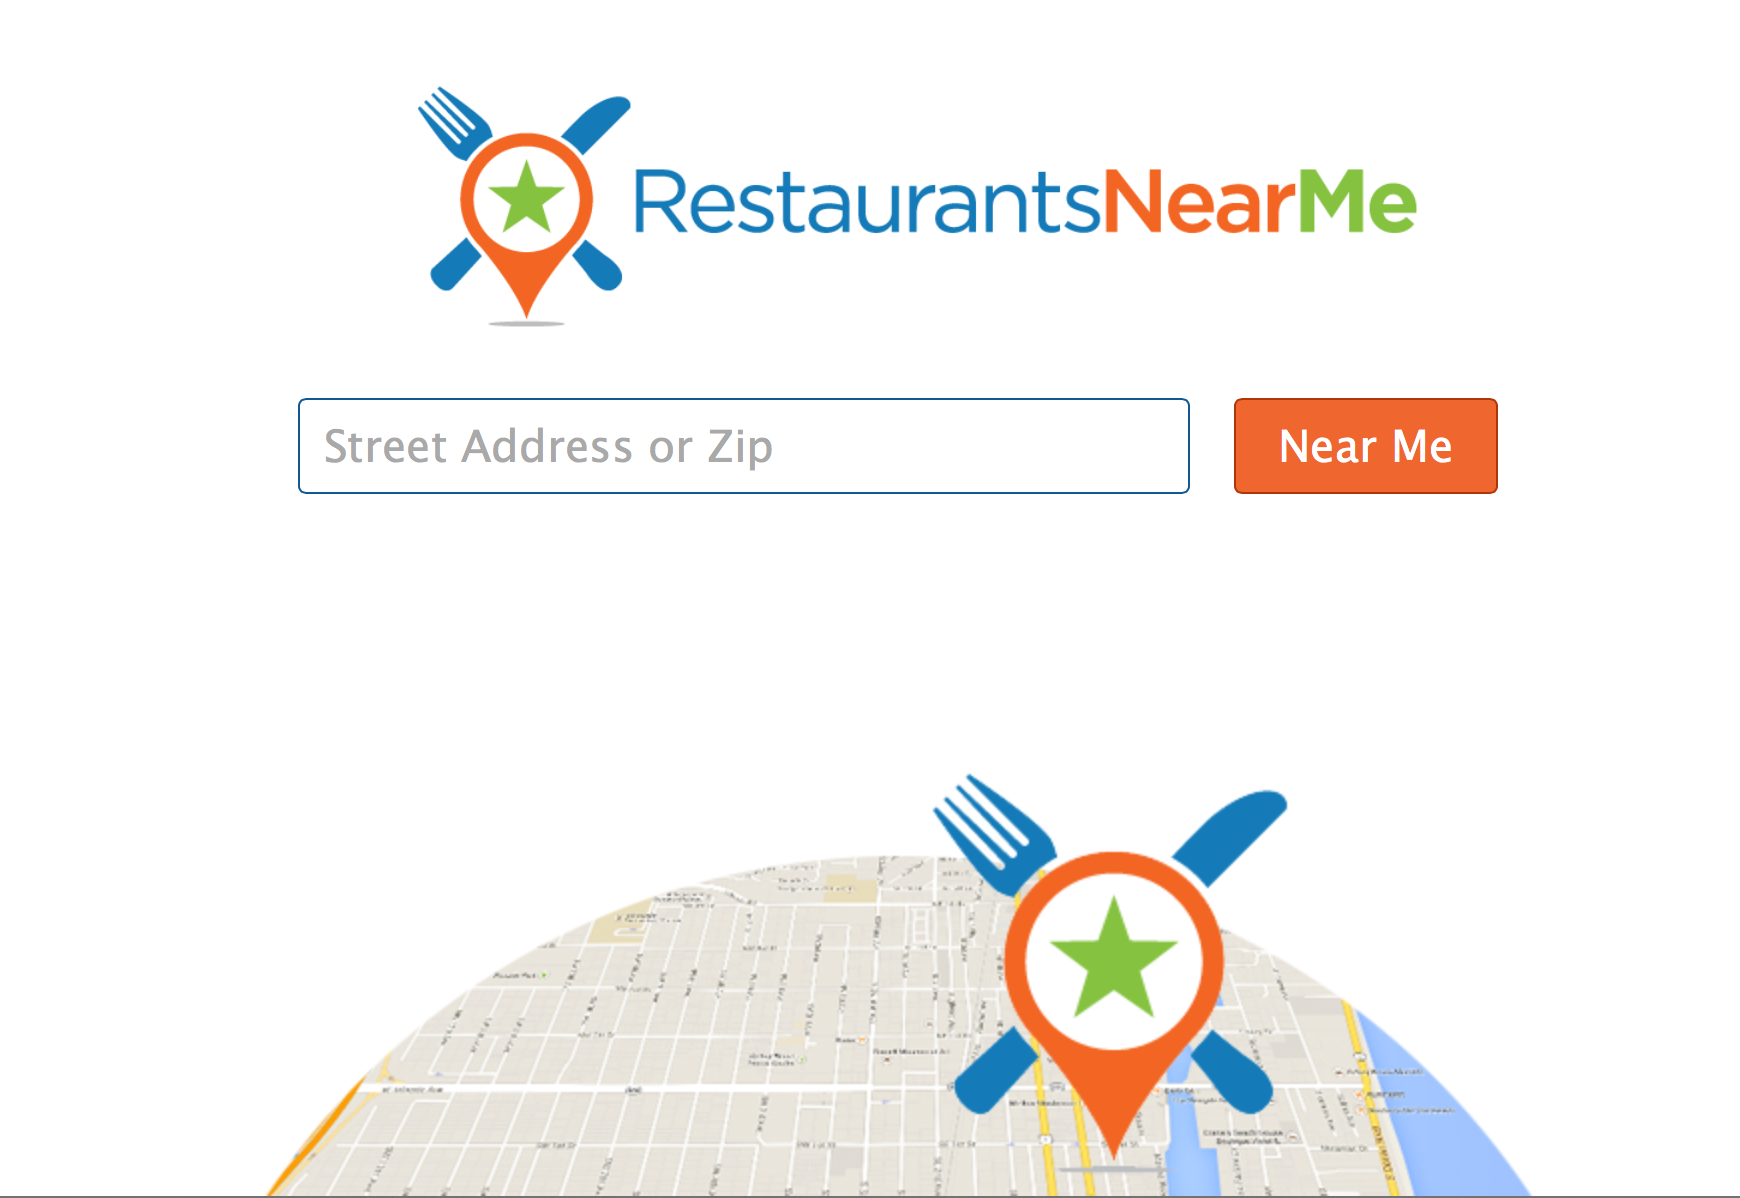 Is Restaurants Near Me The Largest Consumer Search Term?